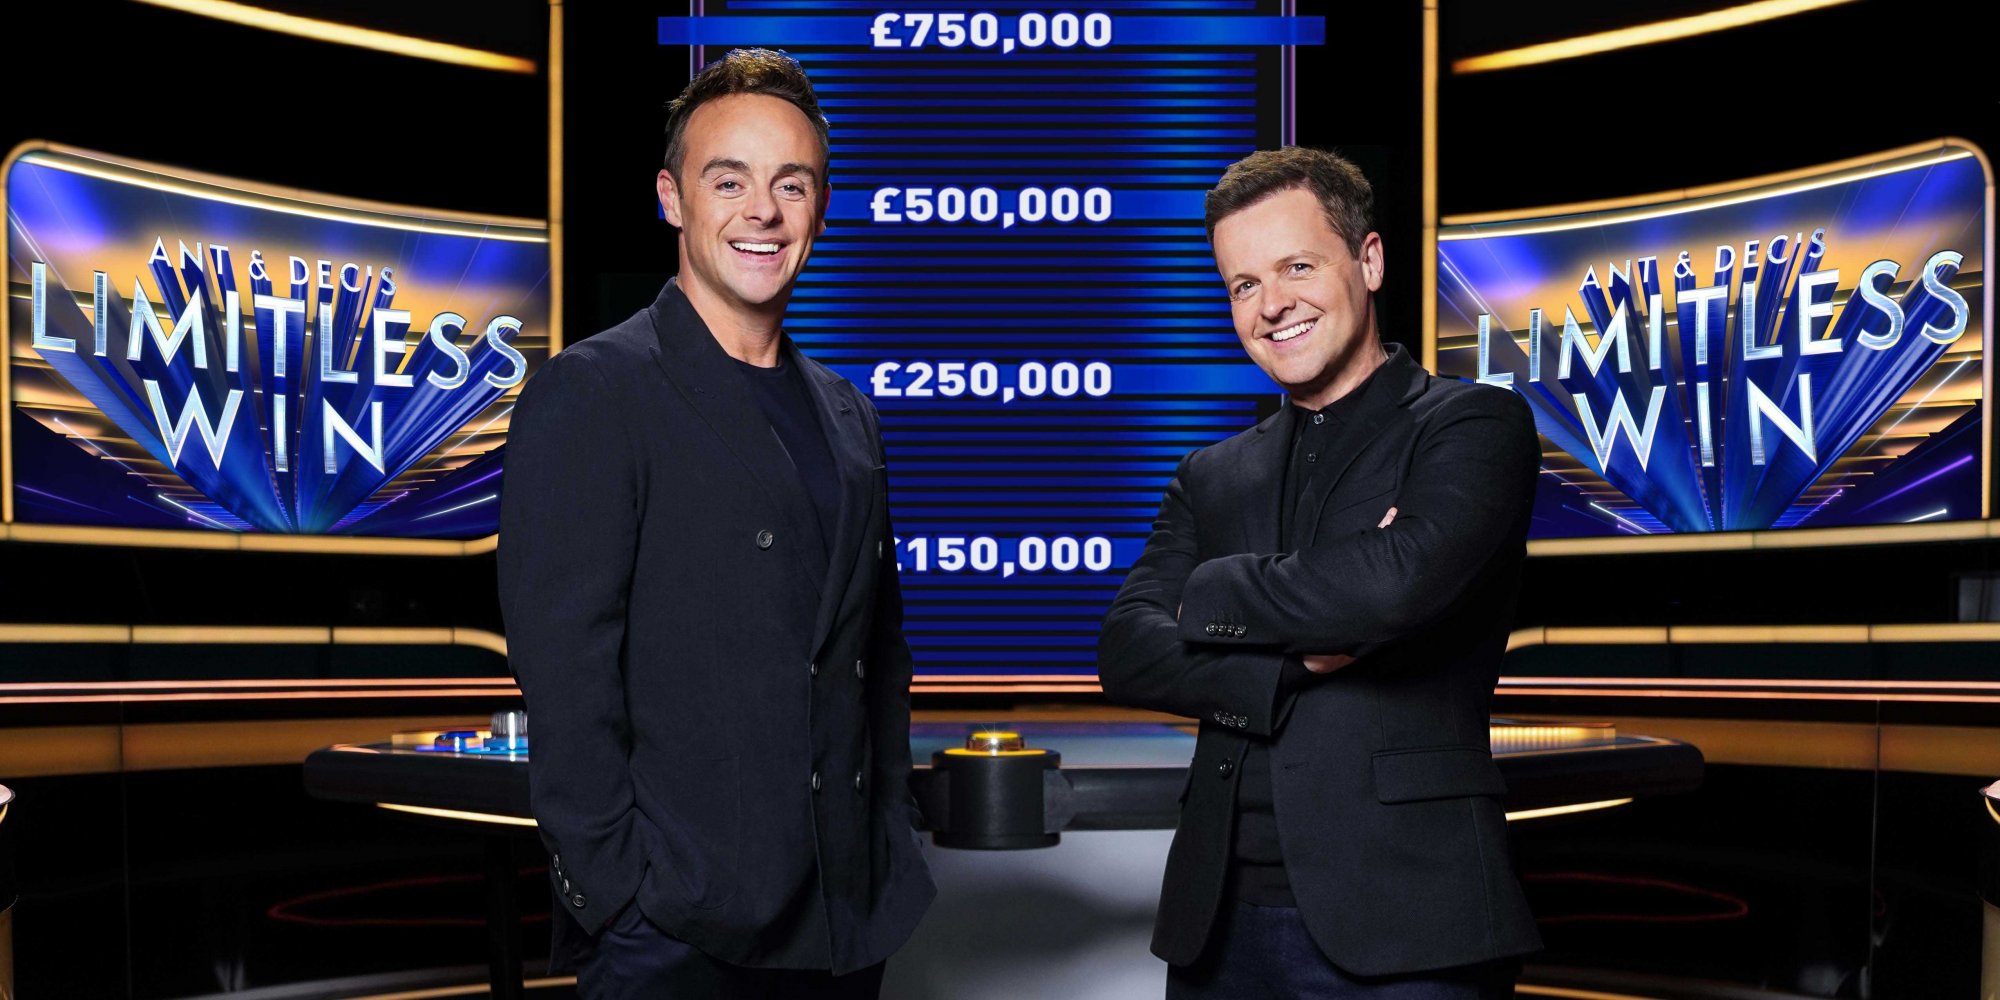 Ant & Dec’s Limitless Win: Series two confirmed!